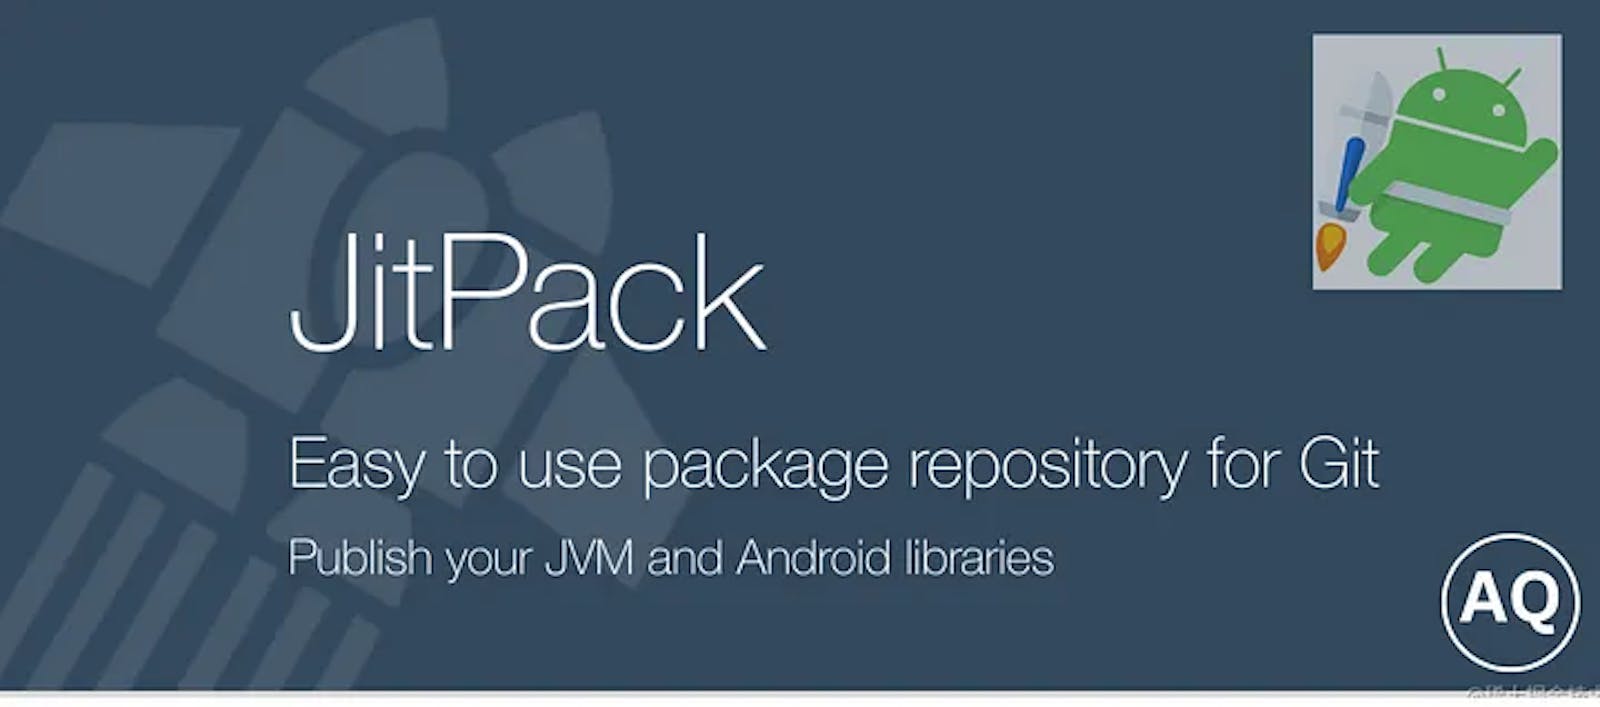 How to Publish a Jitpack Library for a Private Repository